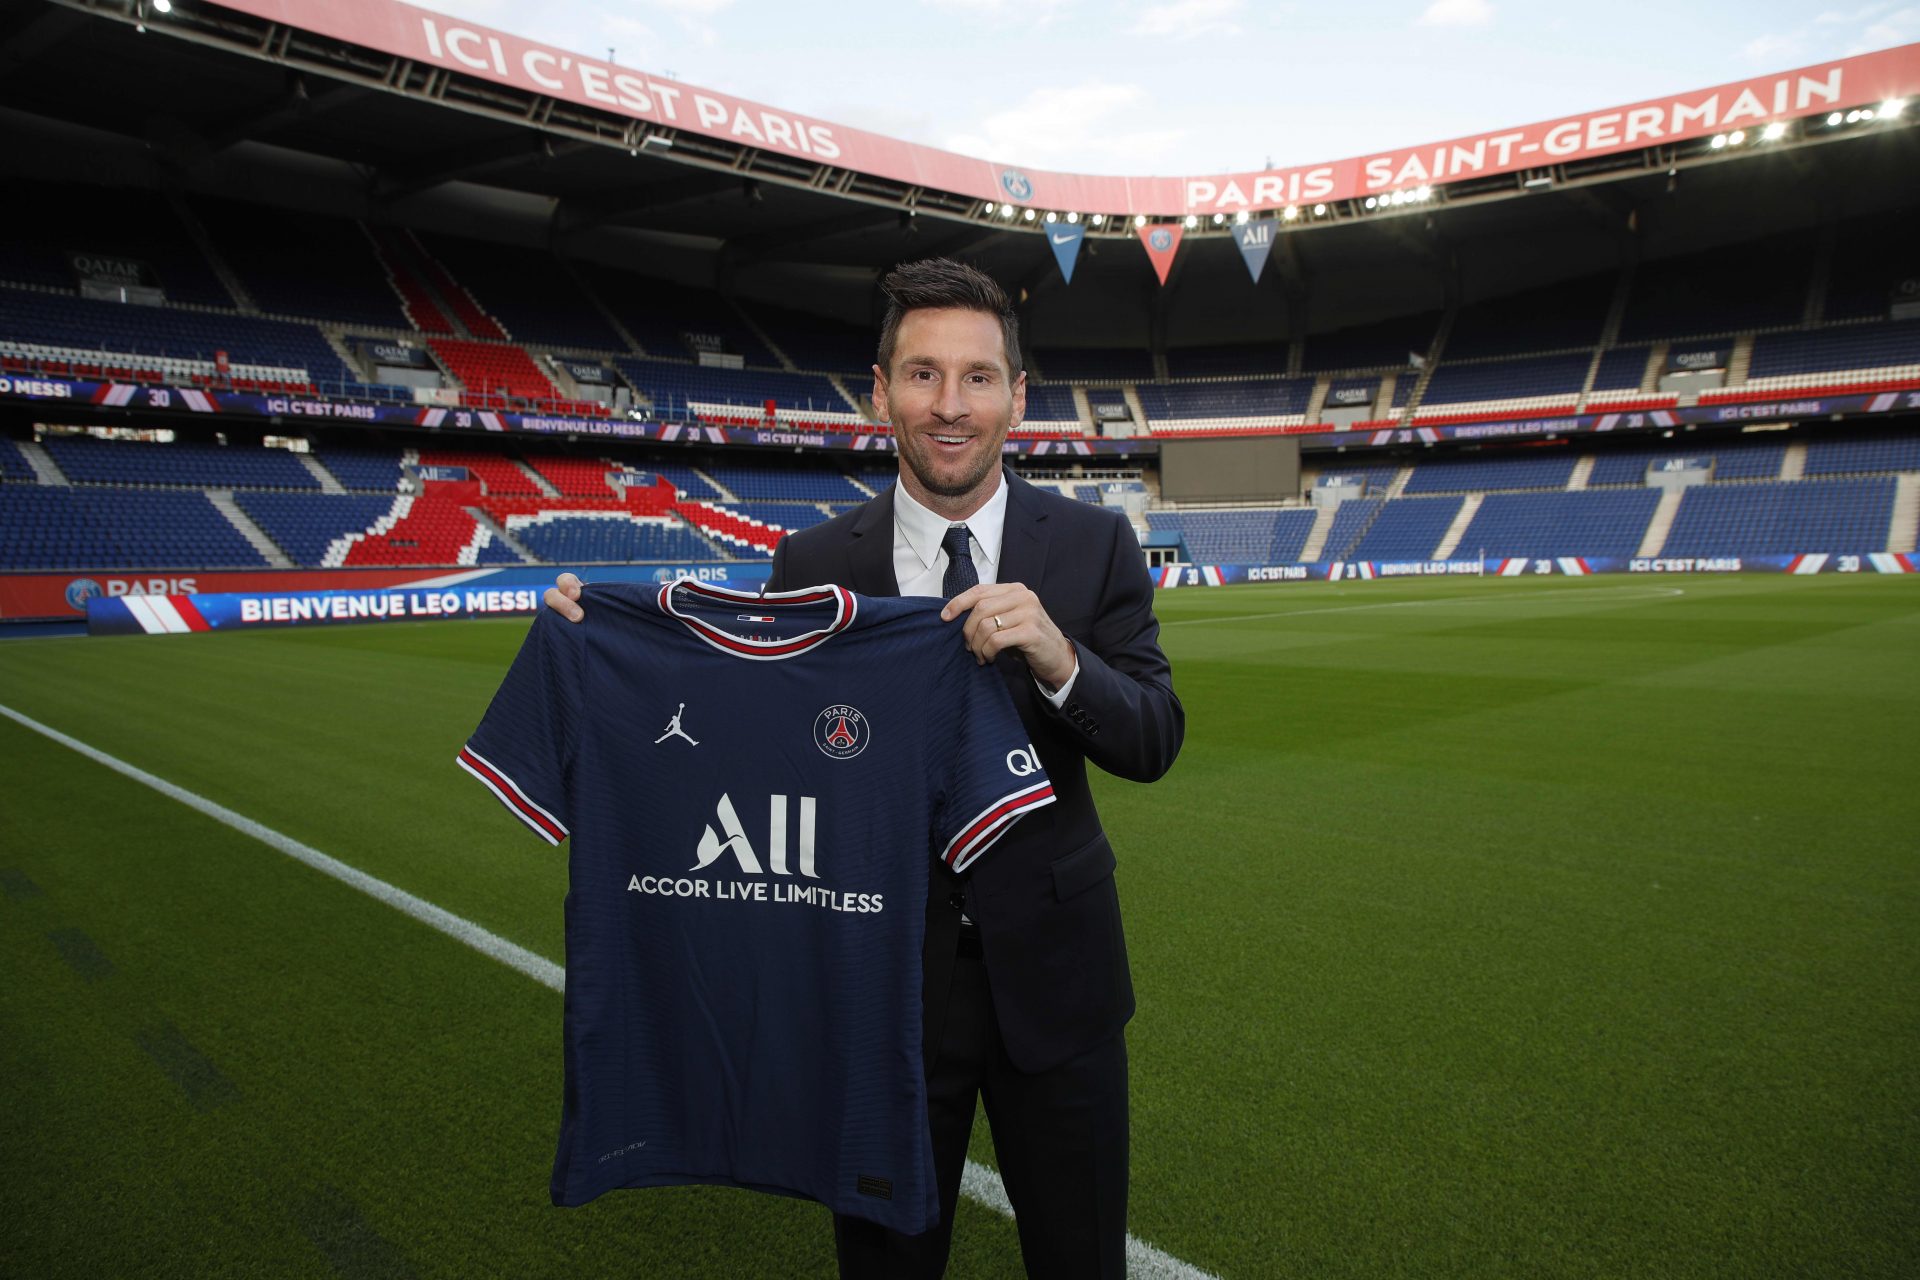 PSG president says world will doubtless be ‘haunted’ by revenues from Messi signing